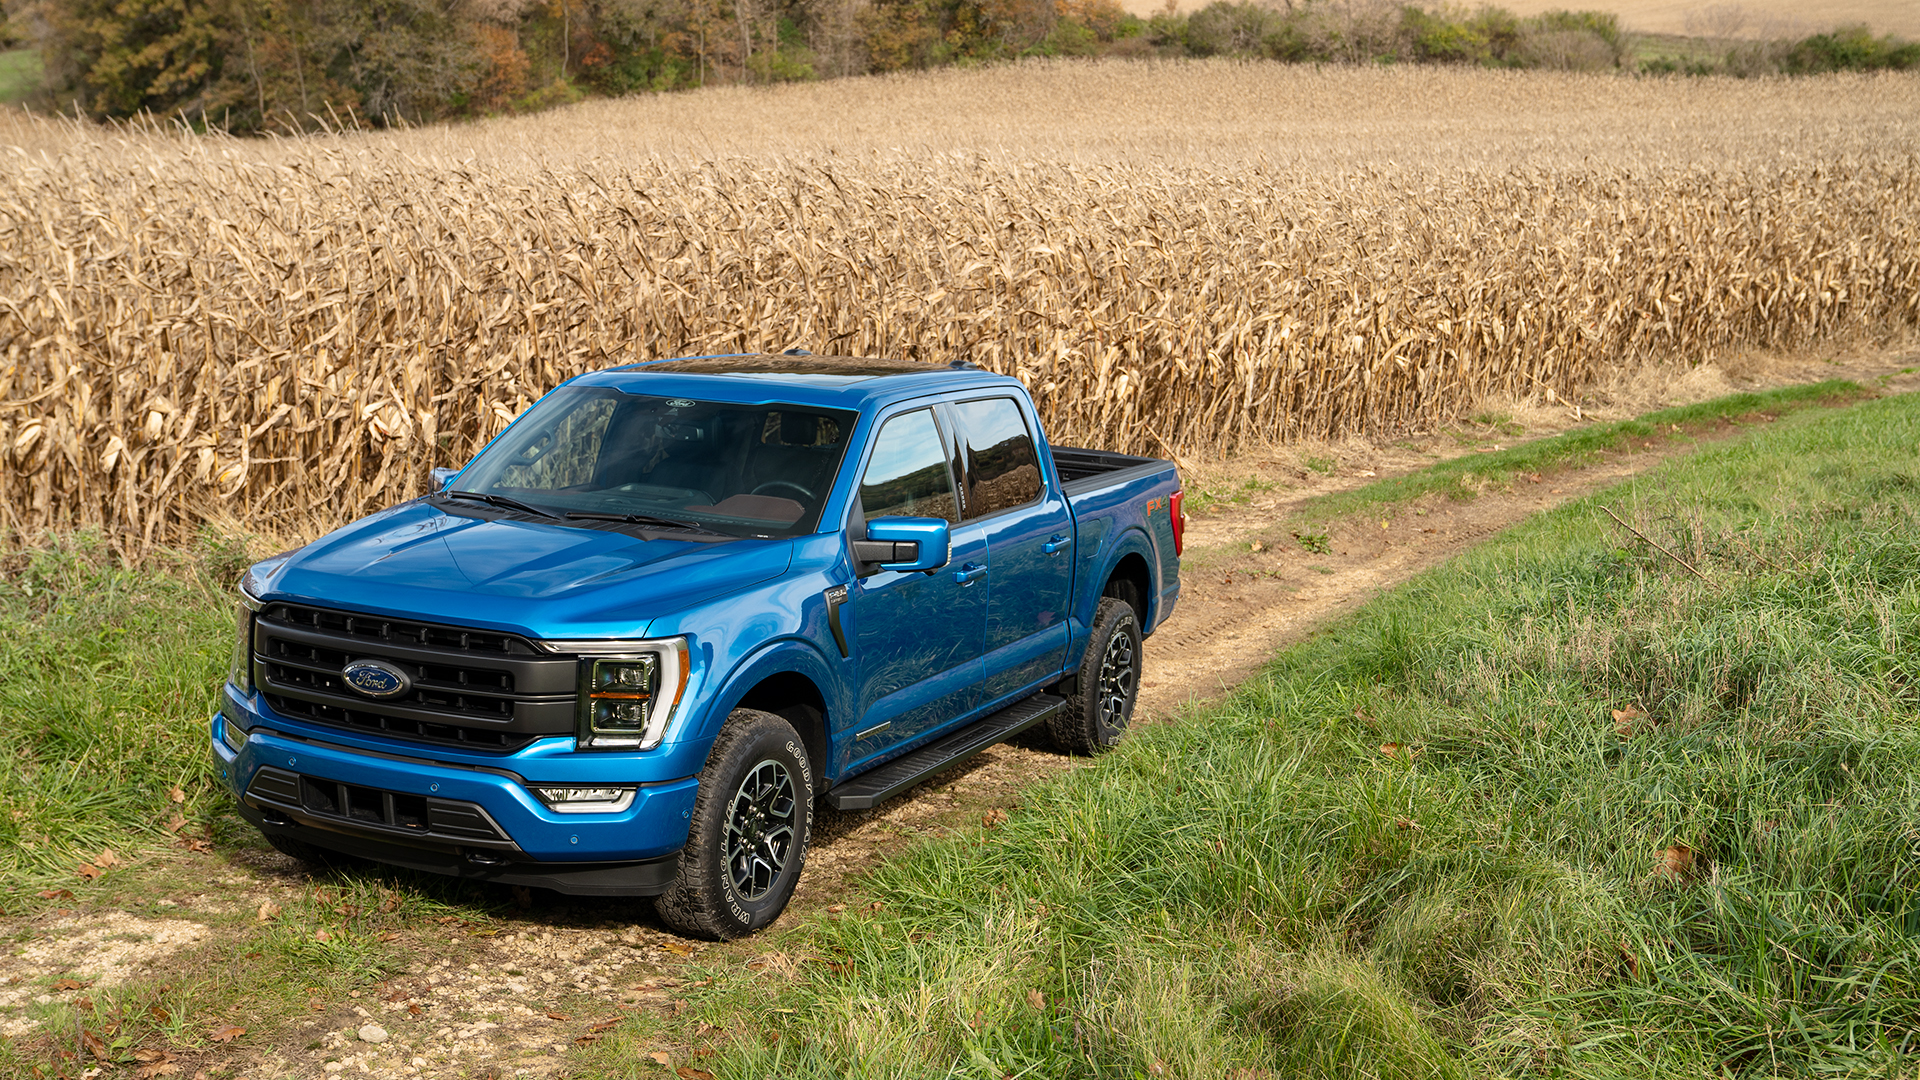 Truck Review: Ford's 2021 F-150 Lariat Is Best-in-Class